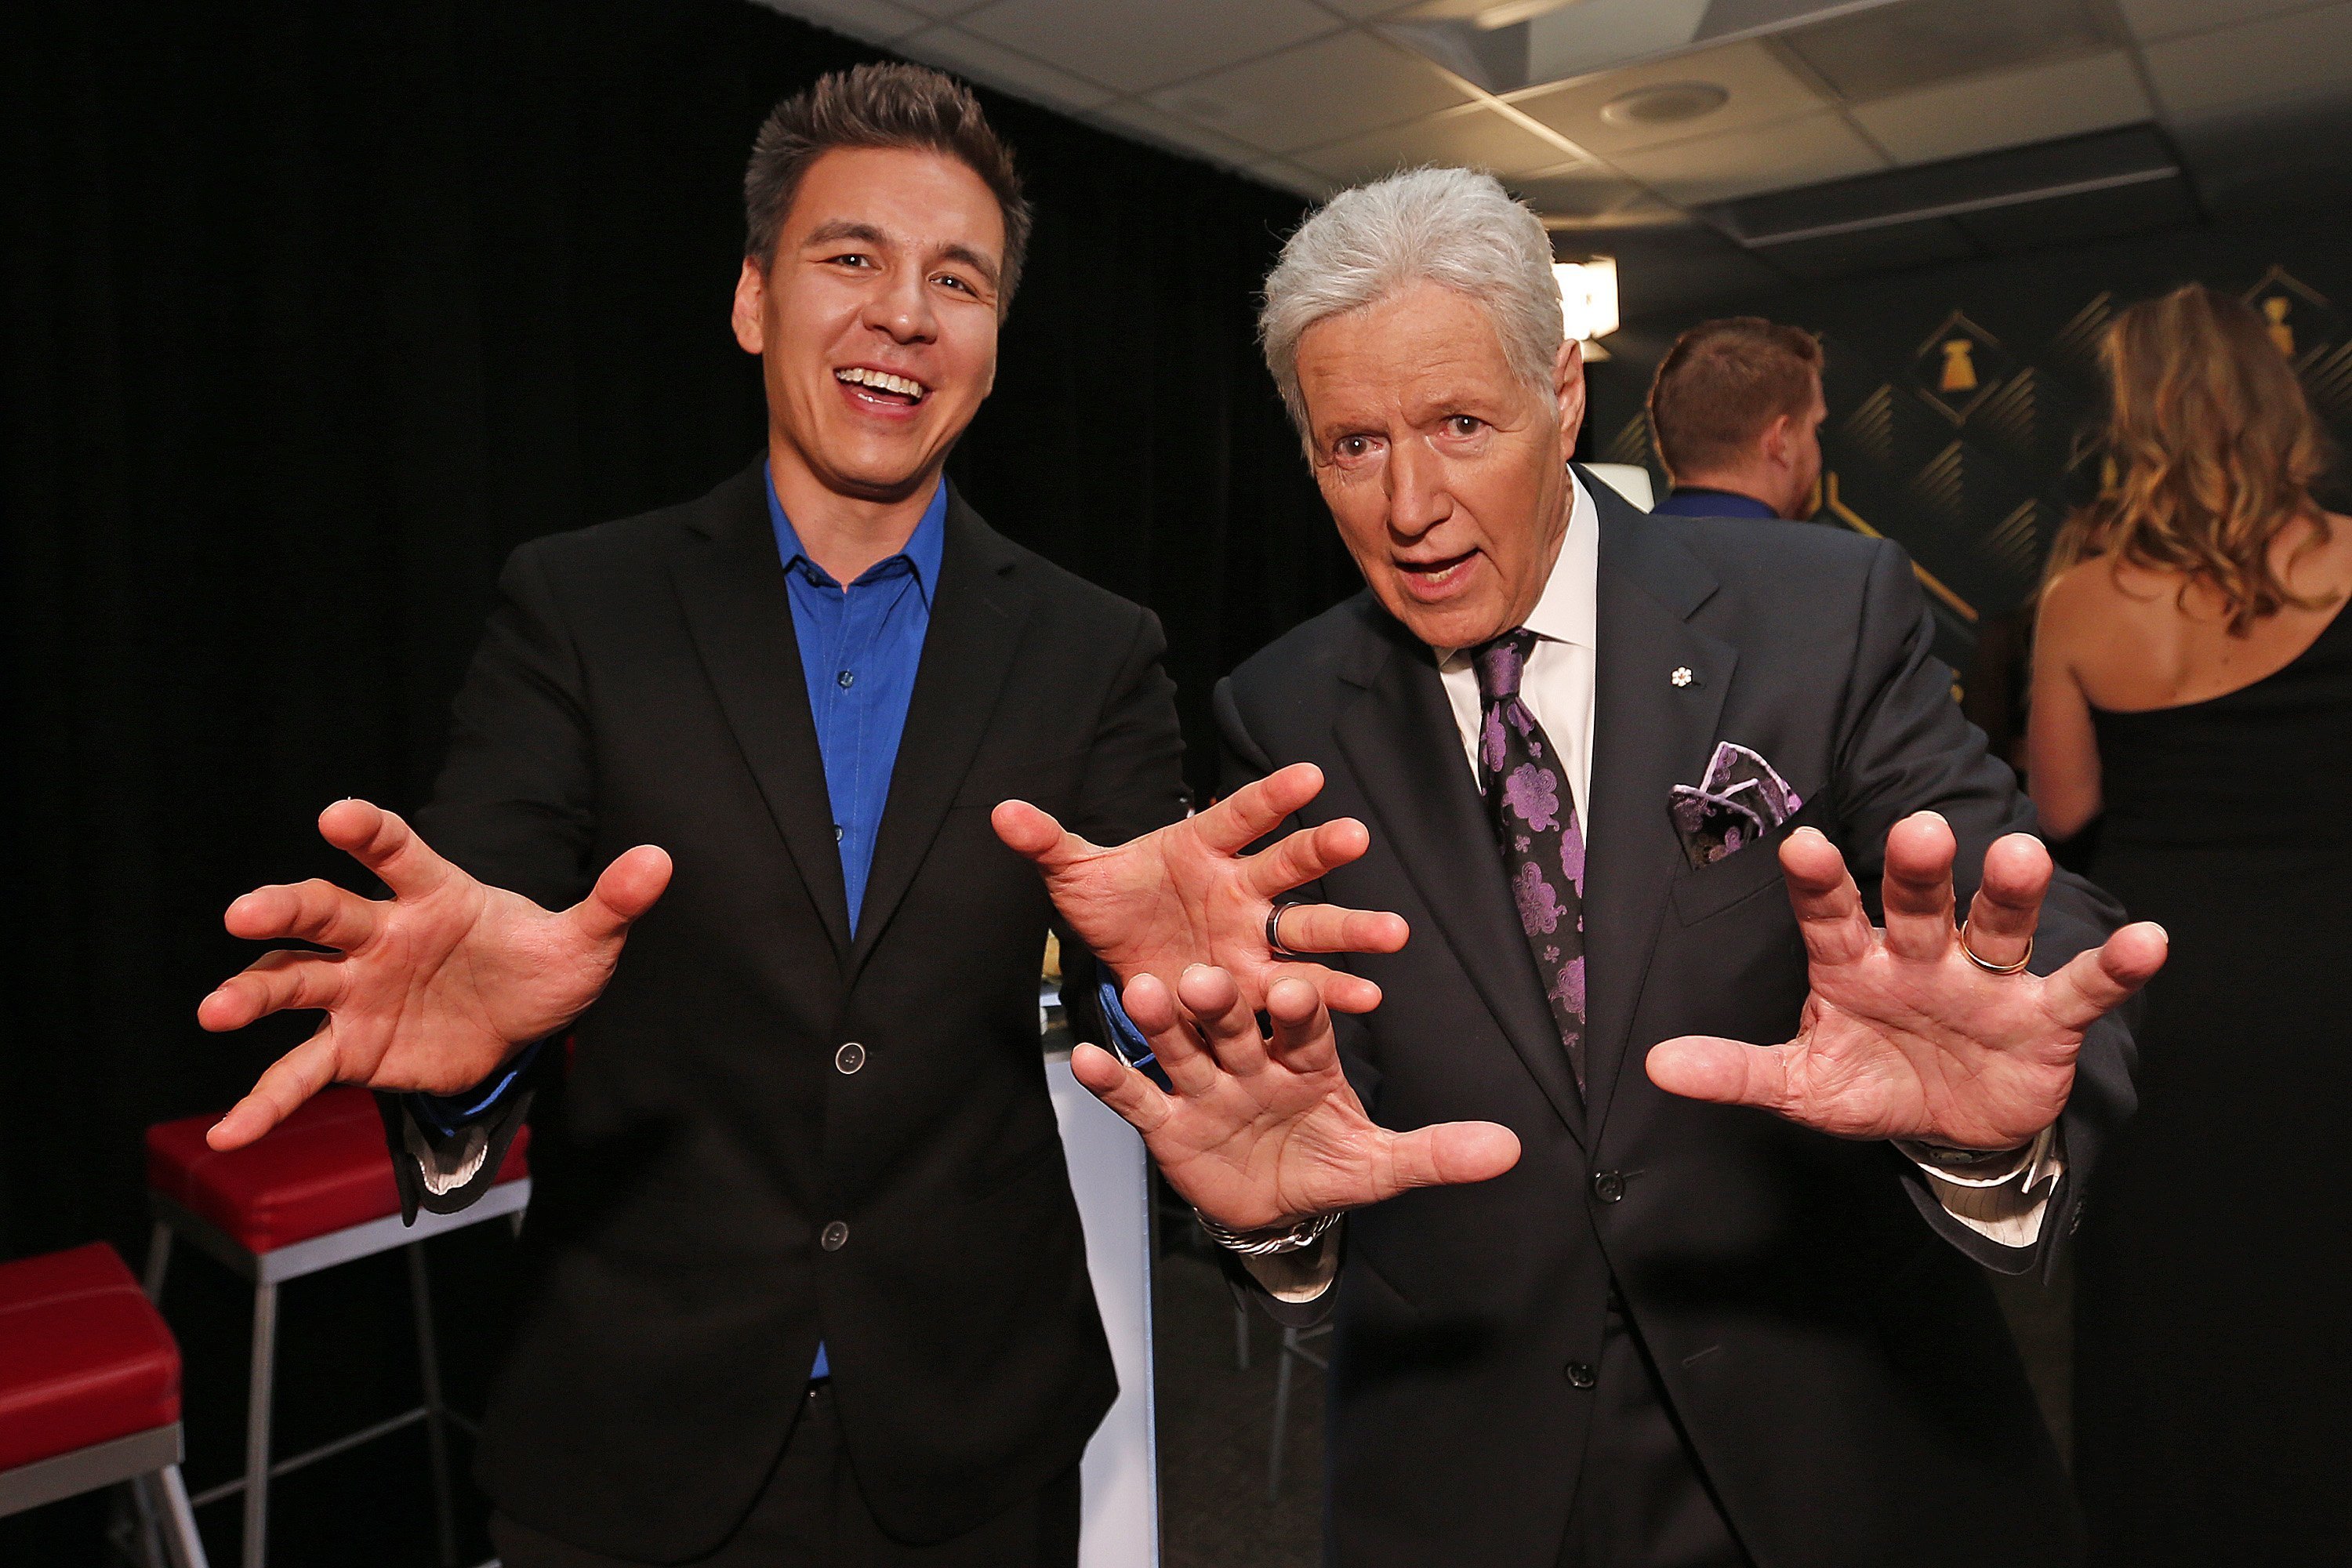 "Jeopardy!" host Alex Trebek poses with "Jeopardy!" champion James Holzhauer backstage at the 2019 NHL Awards. | Source: Getty Images